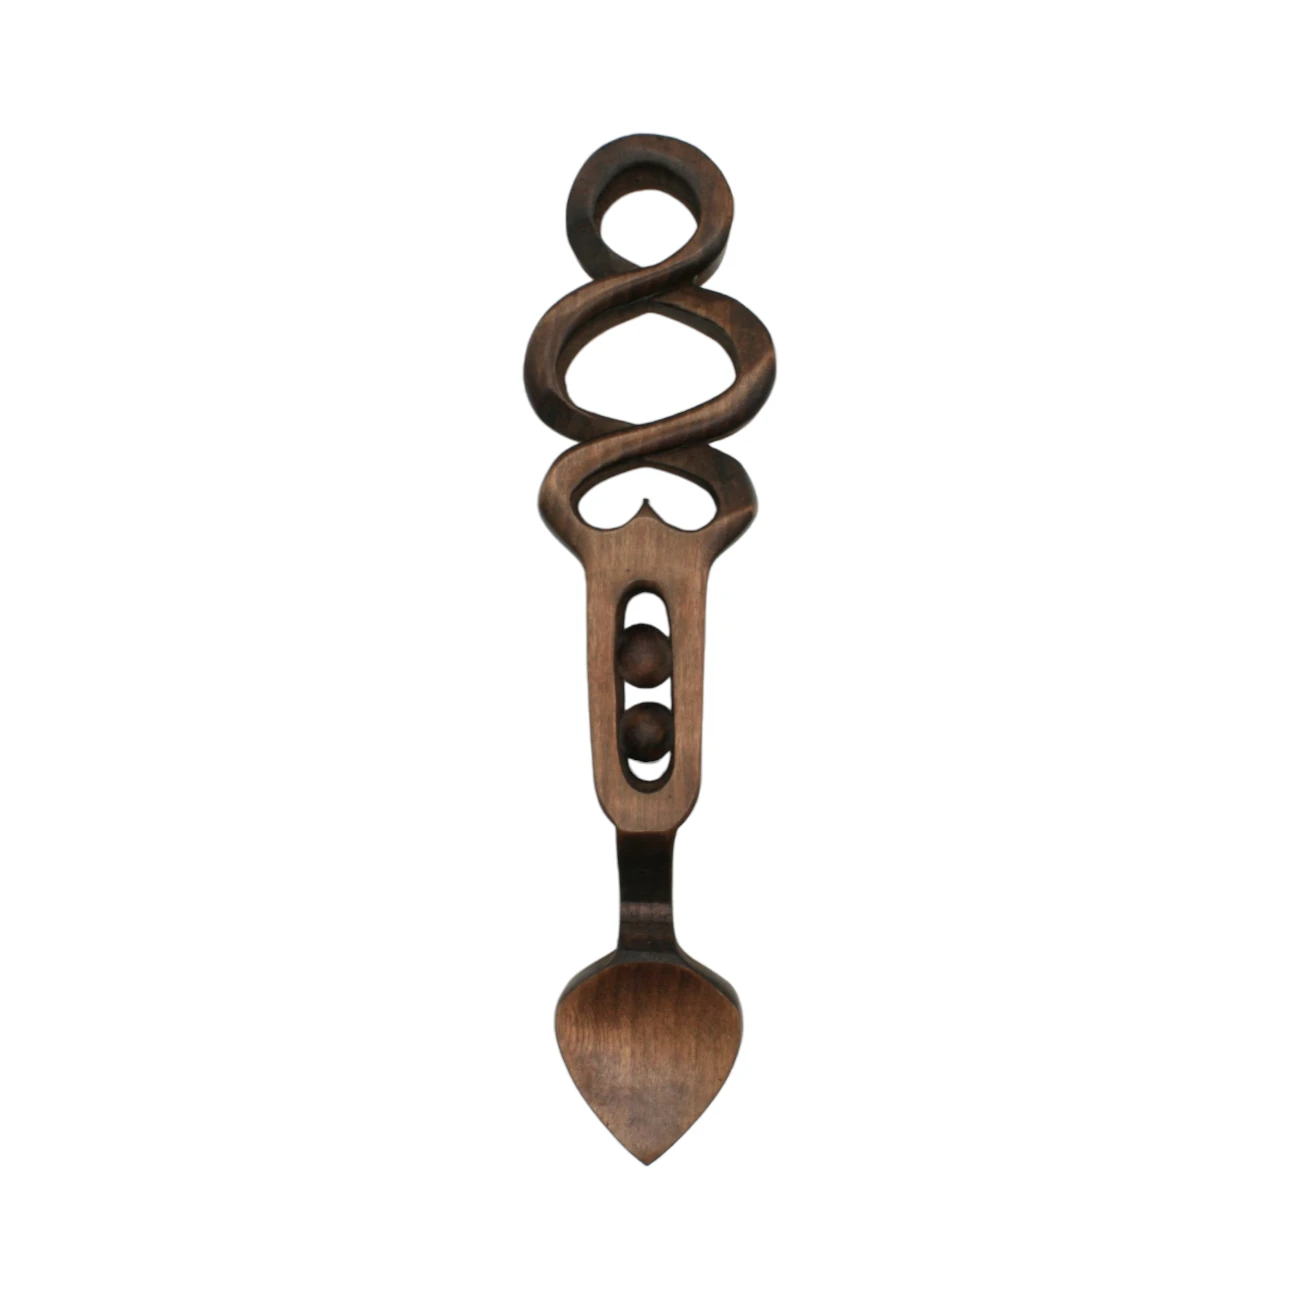 An image of a lovespoon titled Twist & 2 Ball cage